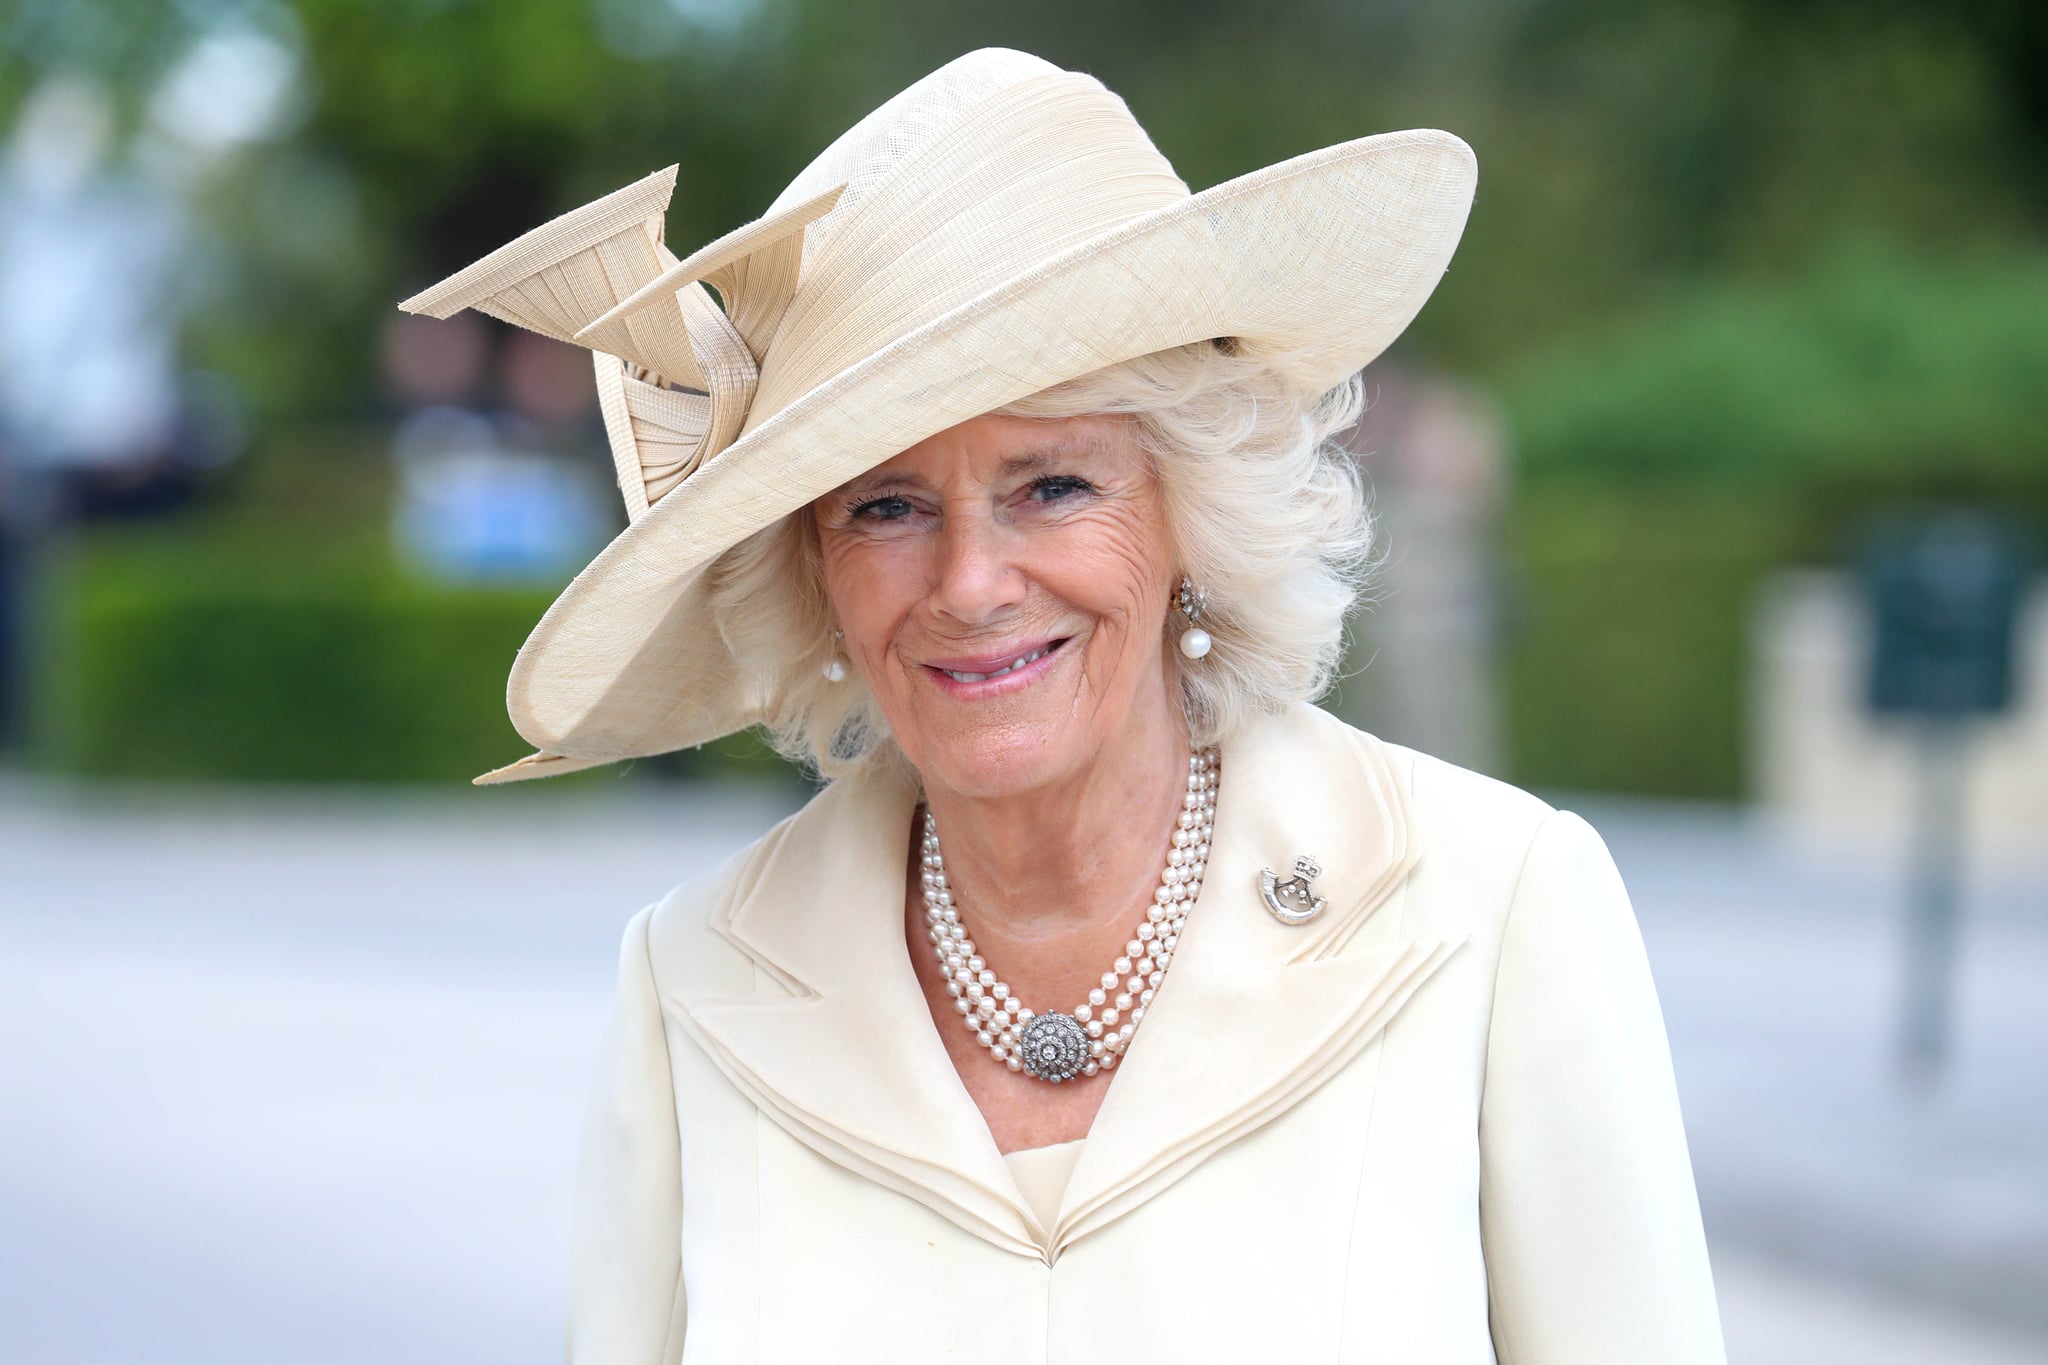 BAYEUX, FRANCE - JUNE 06: Camilla, Duchess of Cornwall arrives at Bayeux War Cemetery on June 06, 2019 in Bayeux, France. Veterans, families, visitors, political leaders and military personnel are gathering in Normandy to commemorate D-Day, which heralded the Allied advance towards Germany and victory about 11 months later.  (Photo by Chris Jackson/Getty Images)